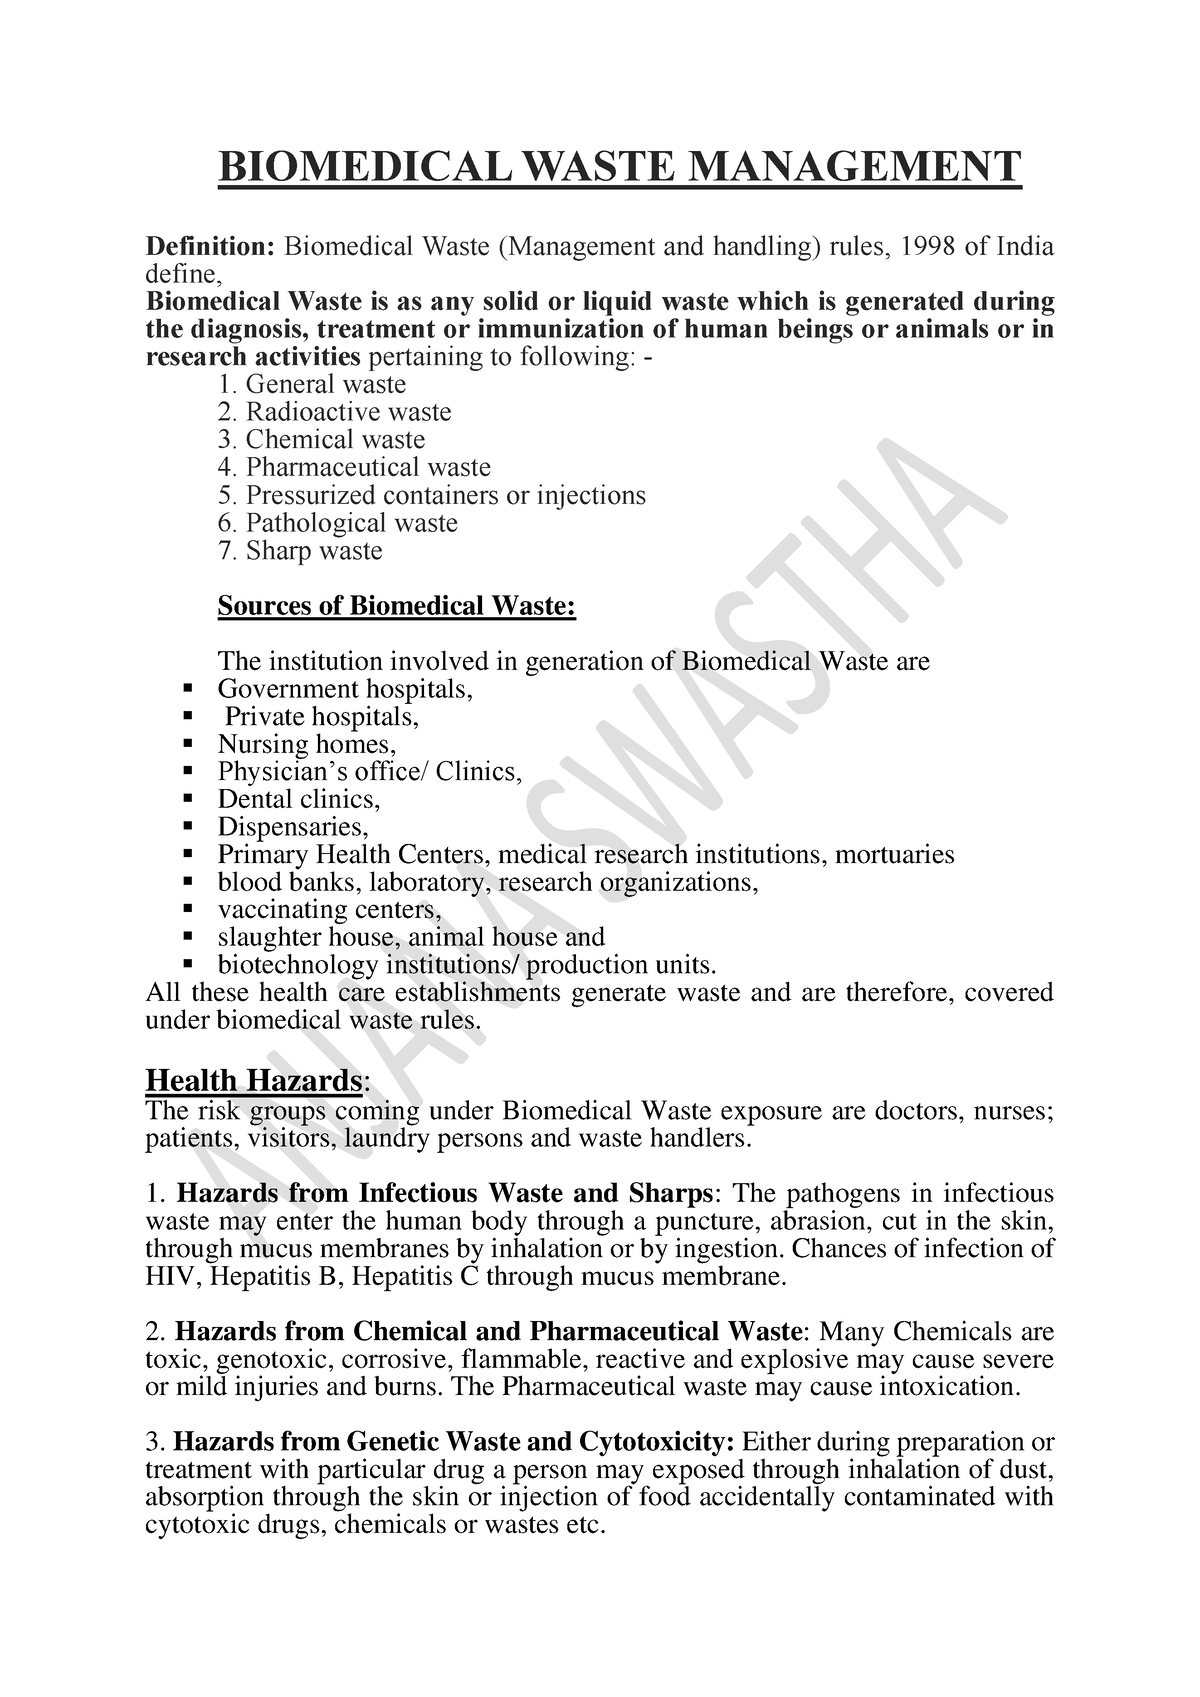 assignment on biomedical waste management pdf